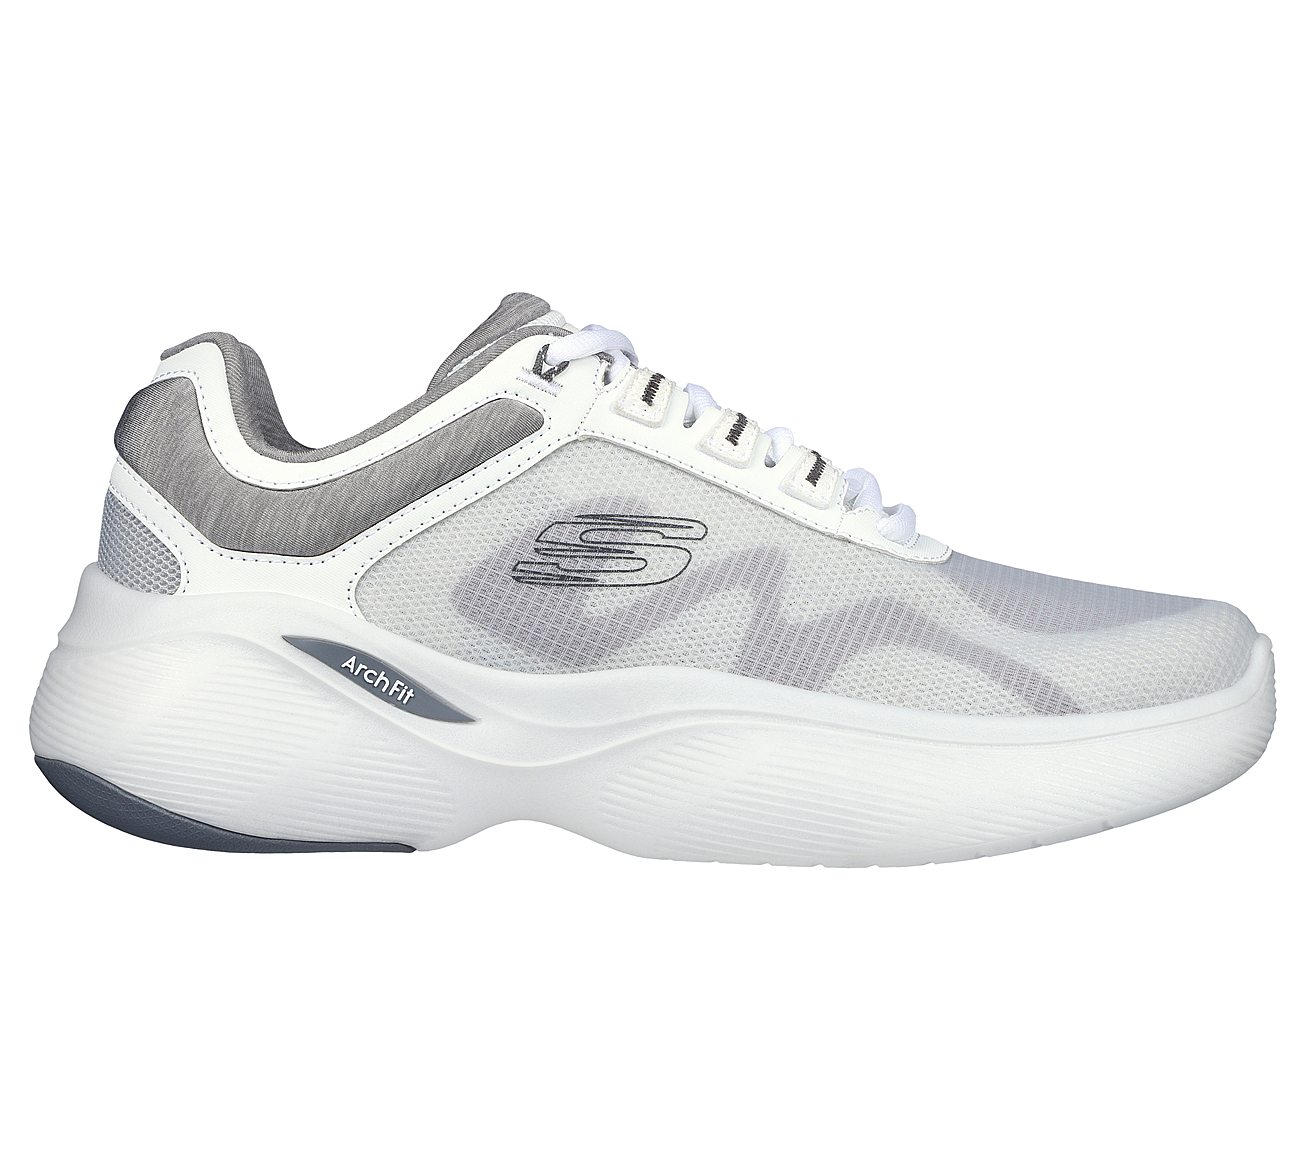 ARCH FIT INFINITY, WHITE/GREY Footwear Lateral View